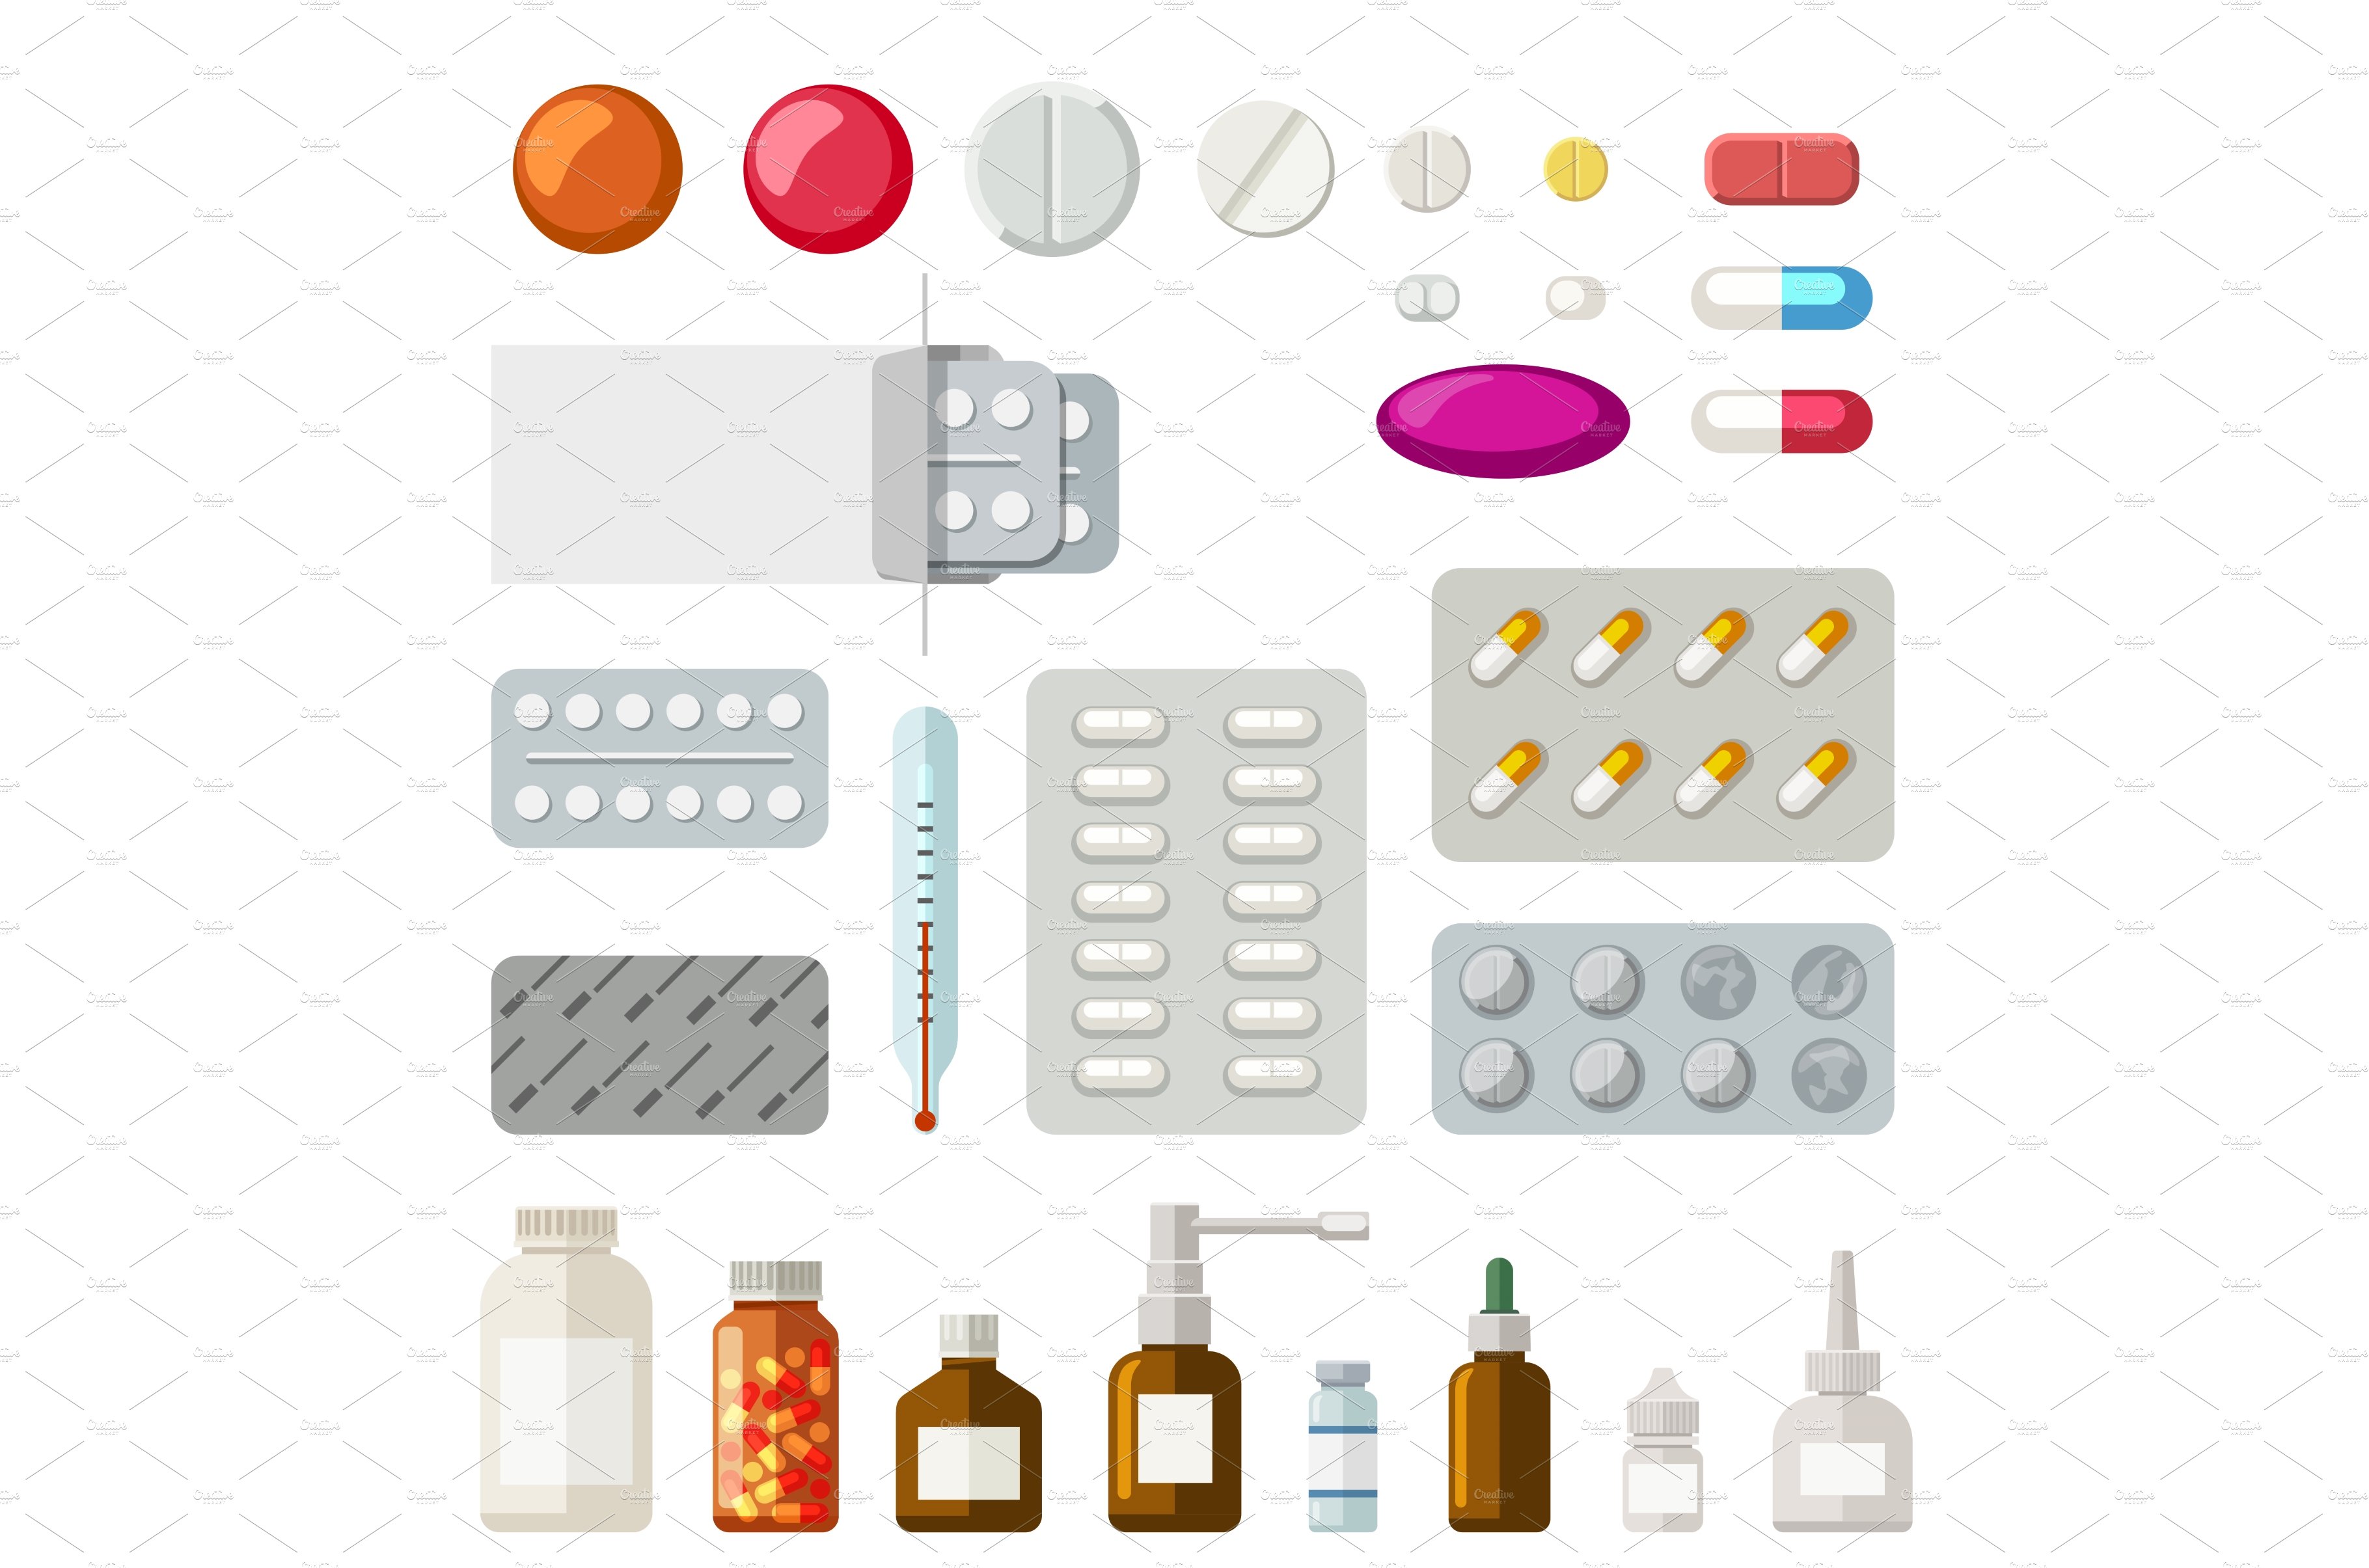 The composition of a first aid kit cover image.